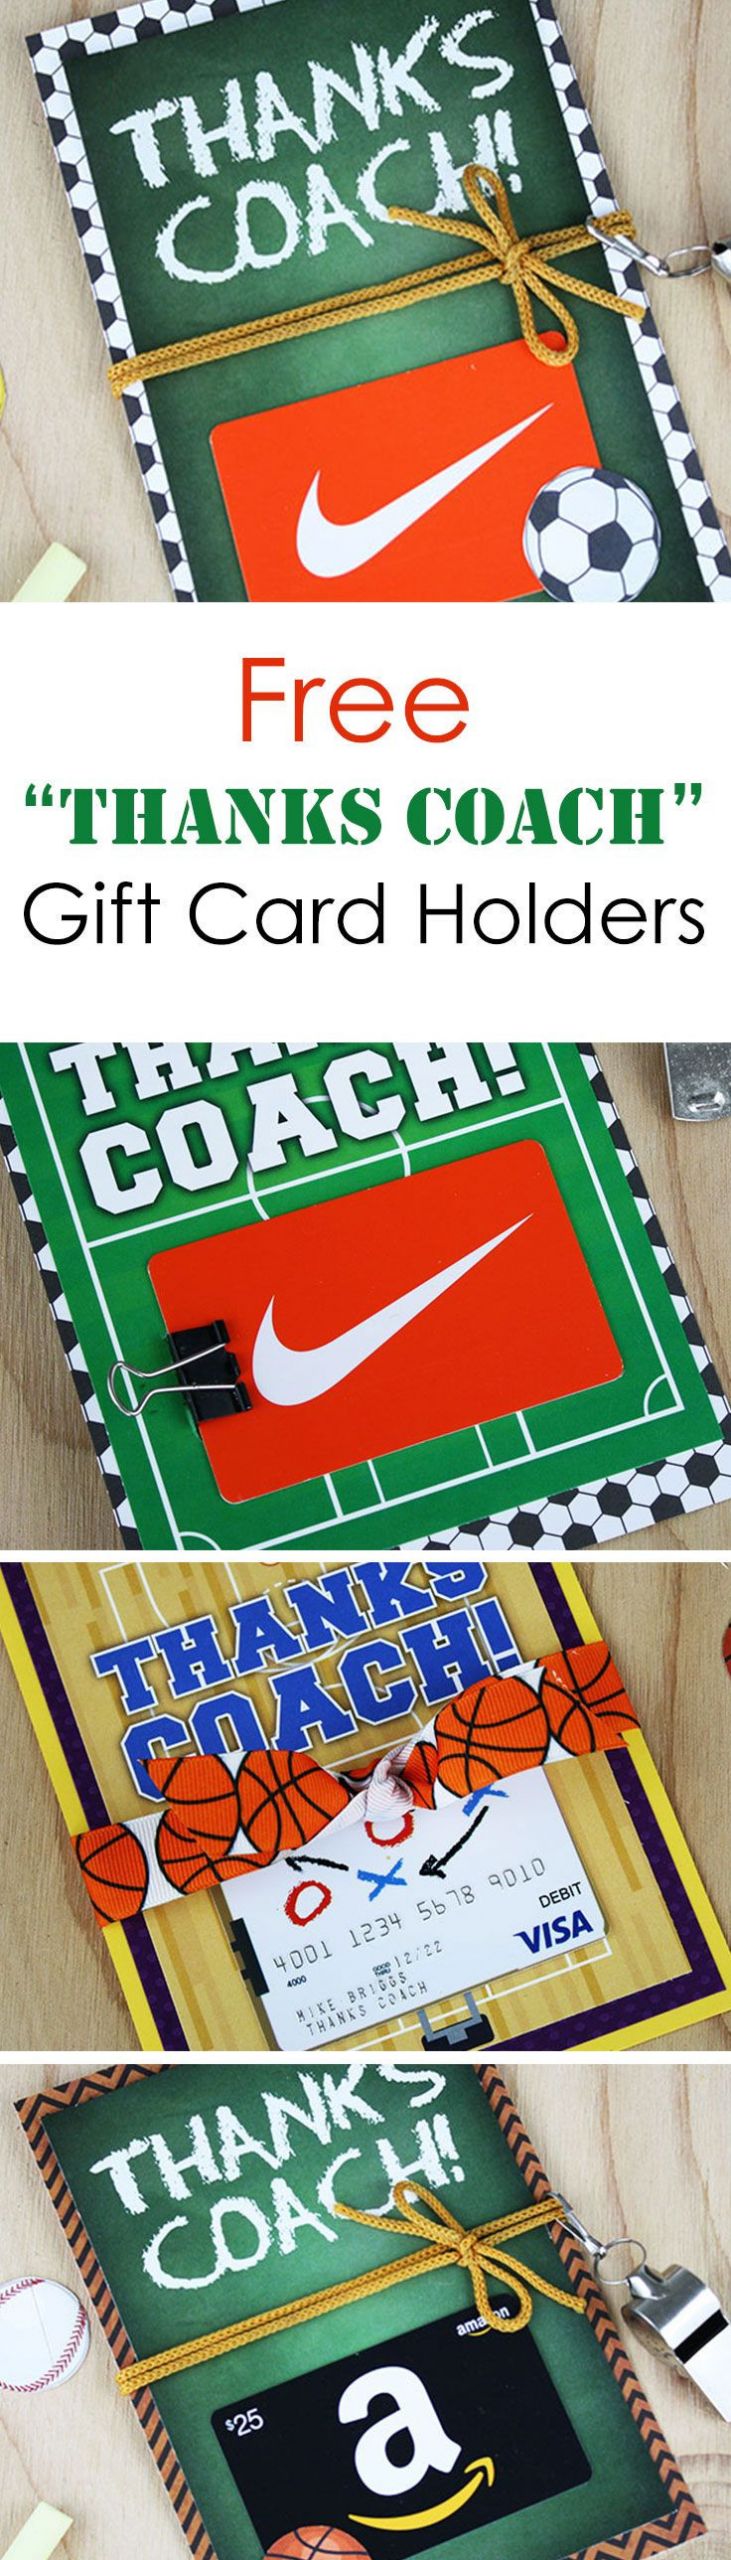 Thank You Coach Gift Ideas
 100 best Thank You Coach Gift Ideas images by Gift Card